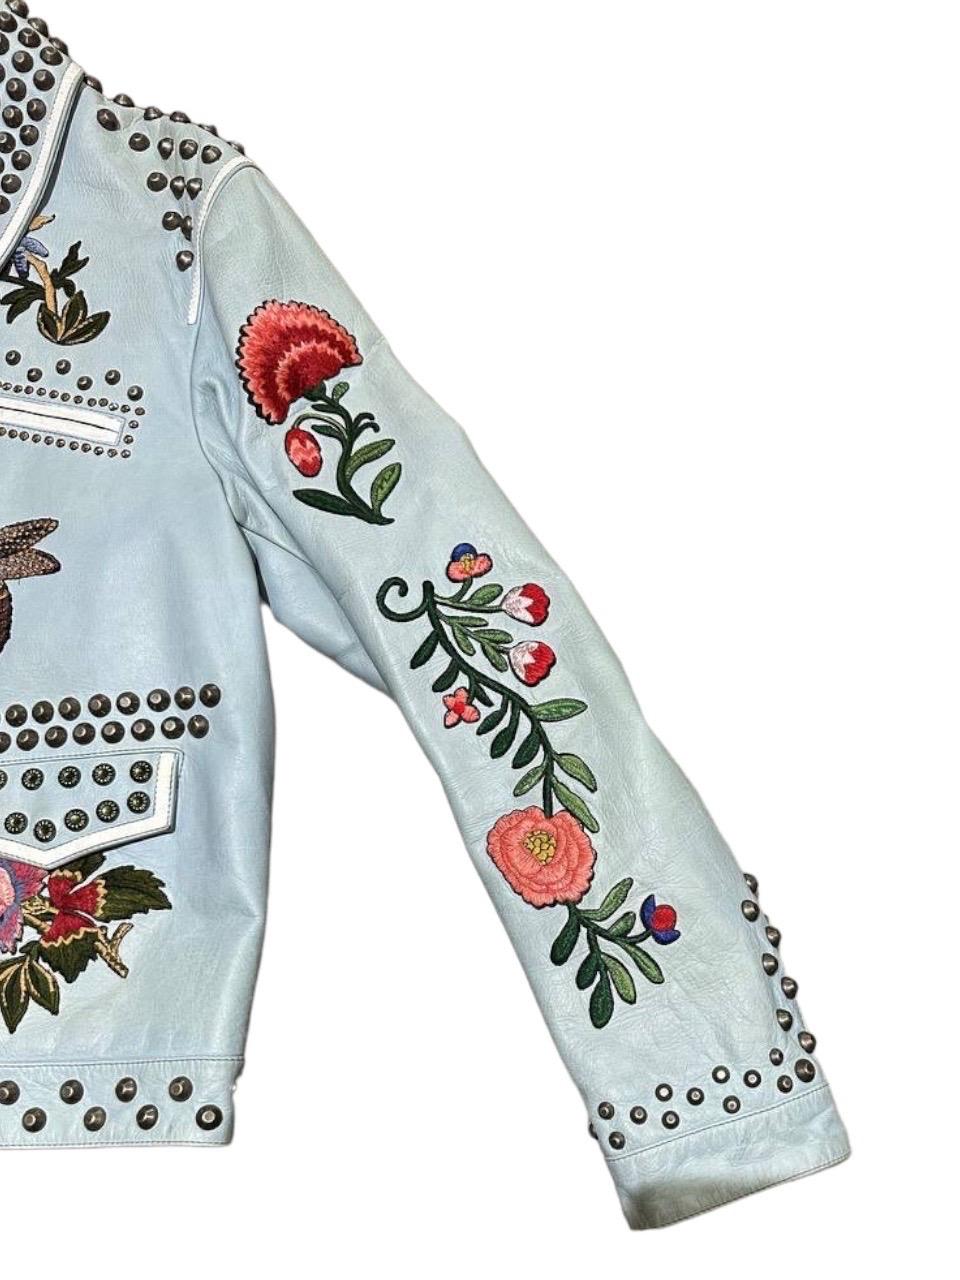 Gucci signed jacket, made of light blue leather with silver hardware. Equipped with studs and hand-embroidered inserts. Equipped with zip closure, with 4 side pockets, two of which with zip. Internally covered in quilted floral fabric. The product